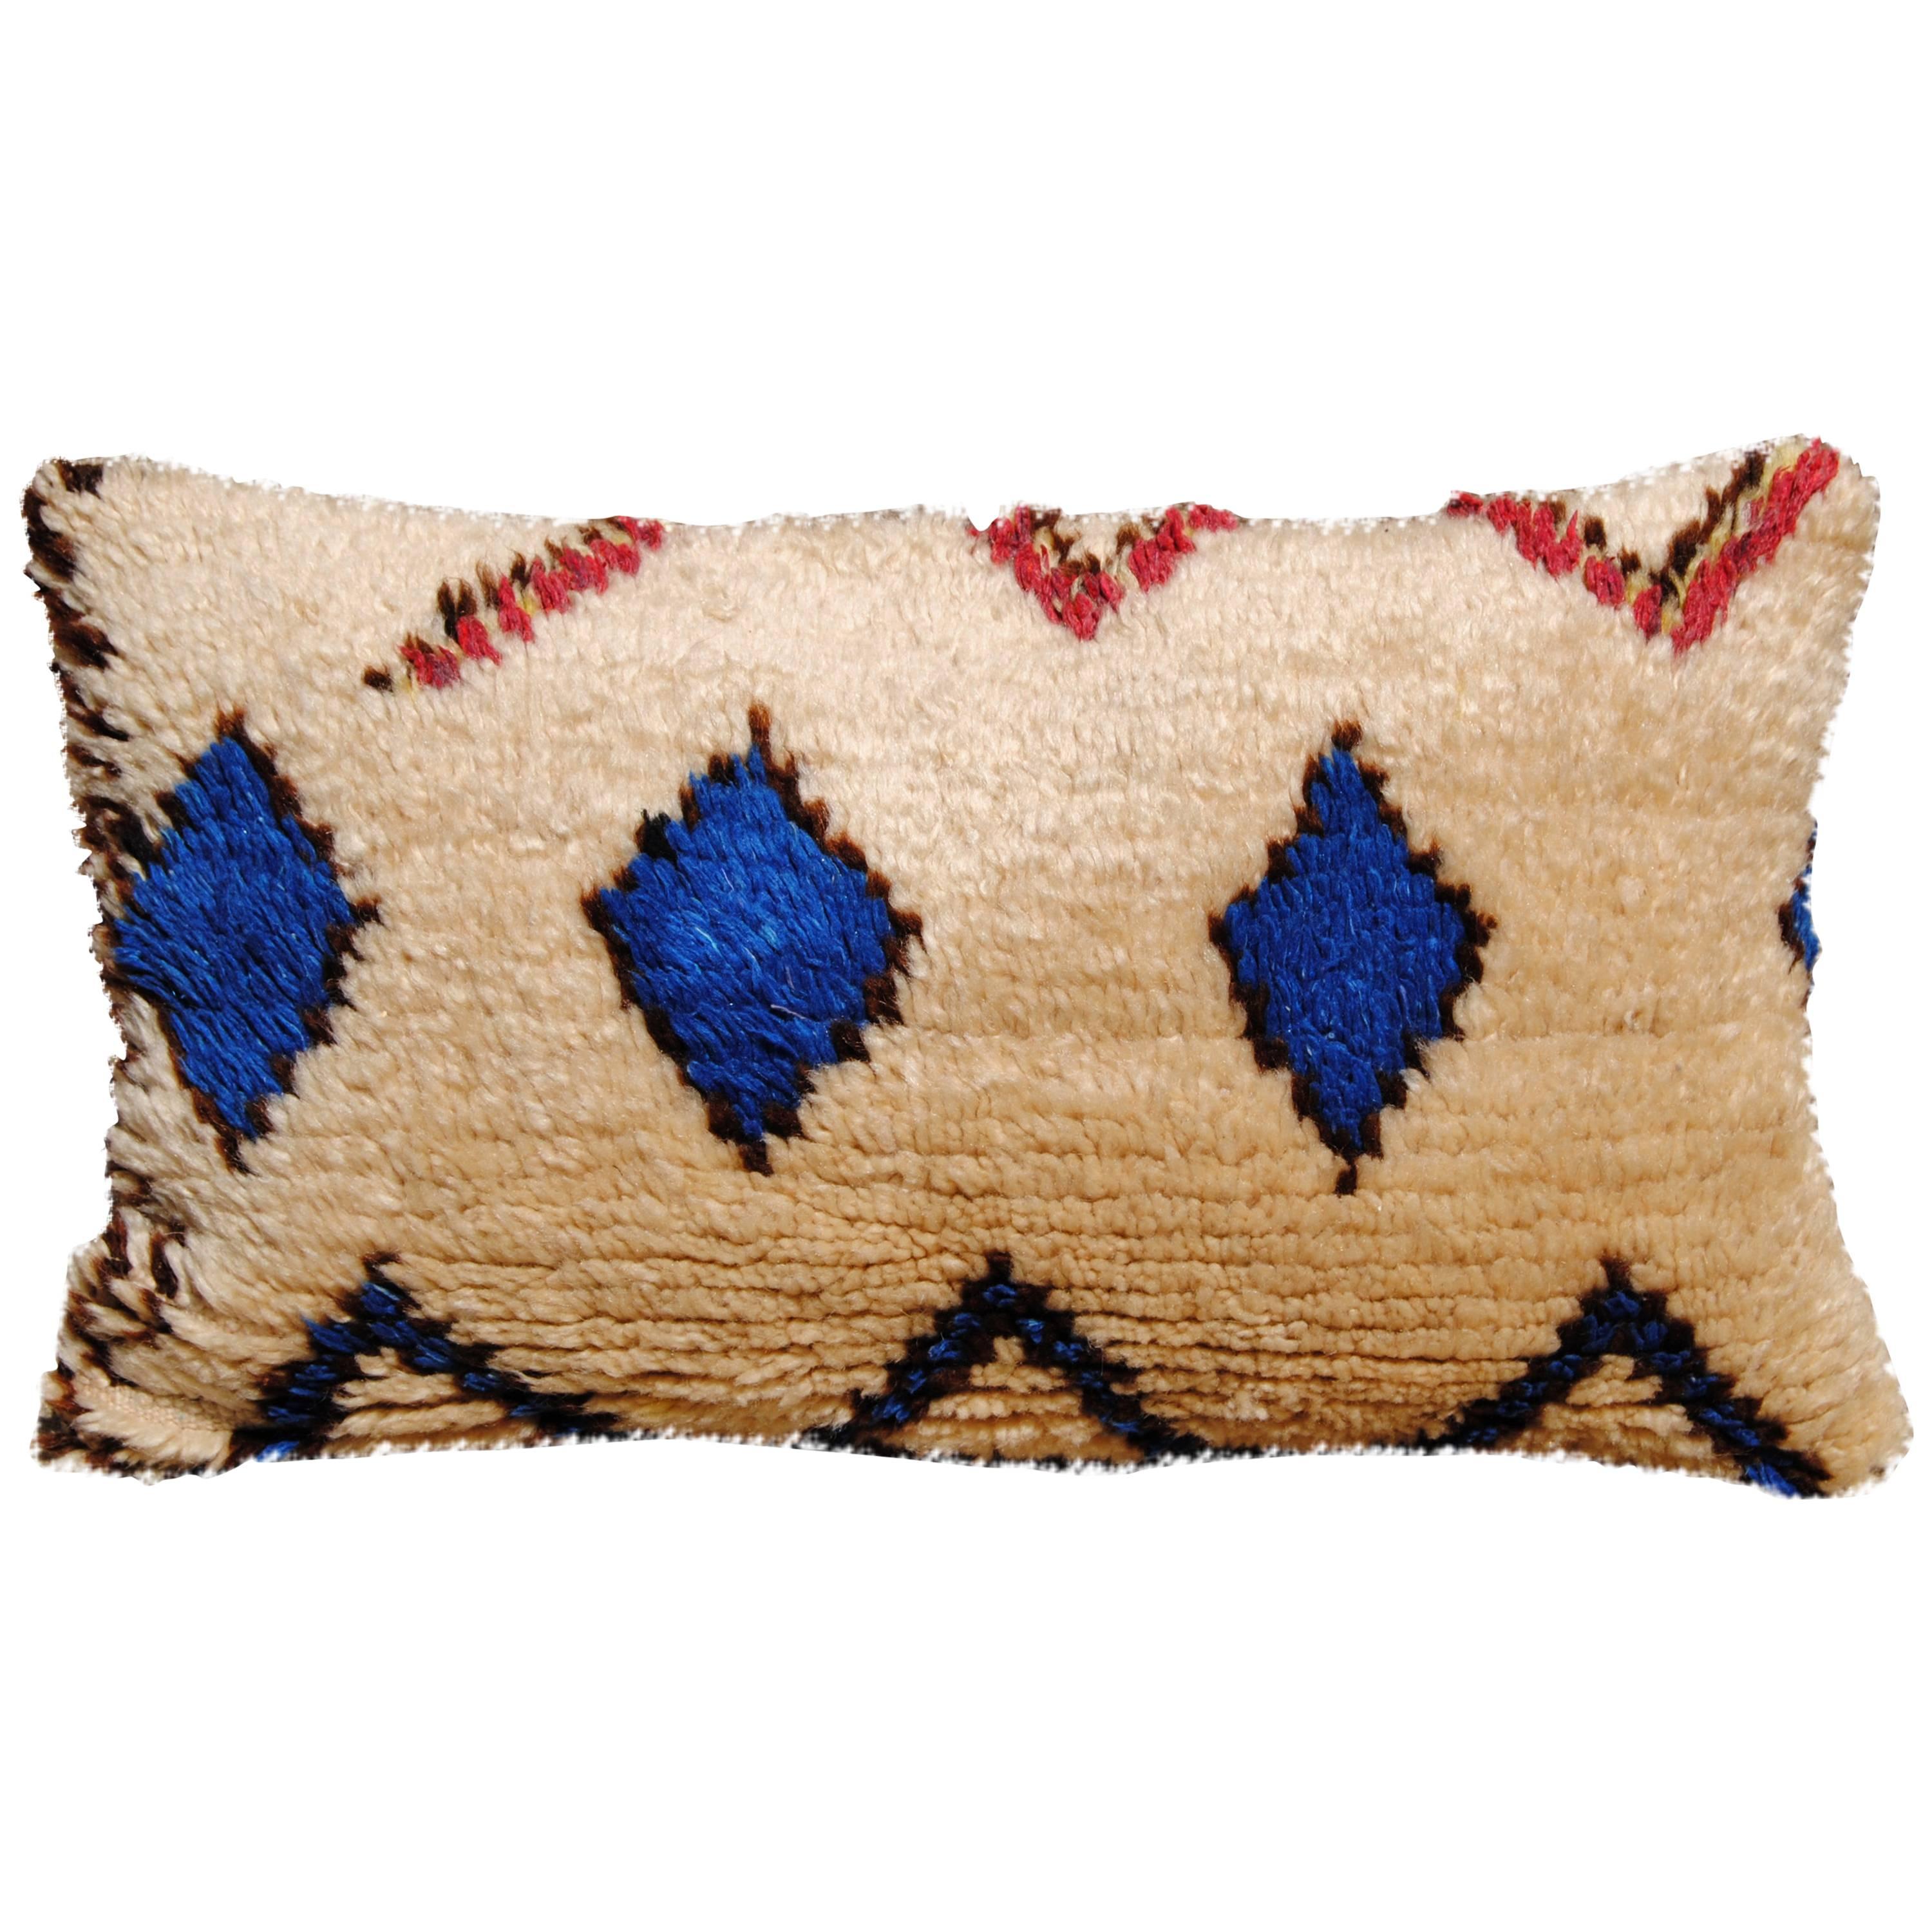 Moroccan Hand-Loomed Wool Azilal Pillow, Blue Diamonds